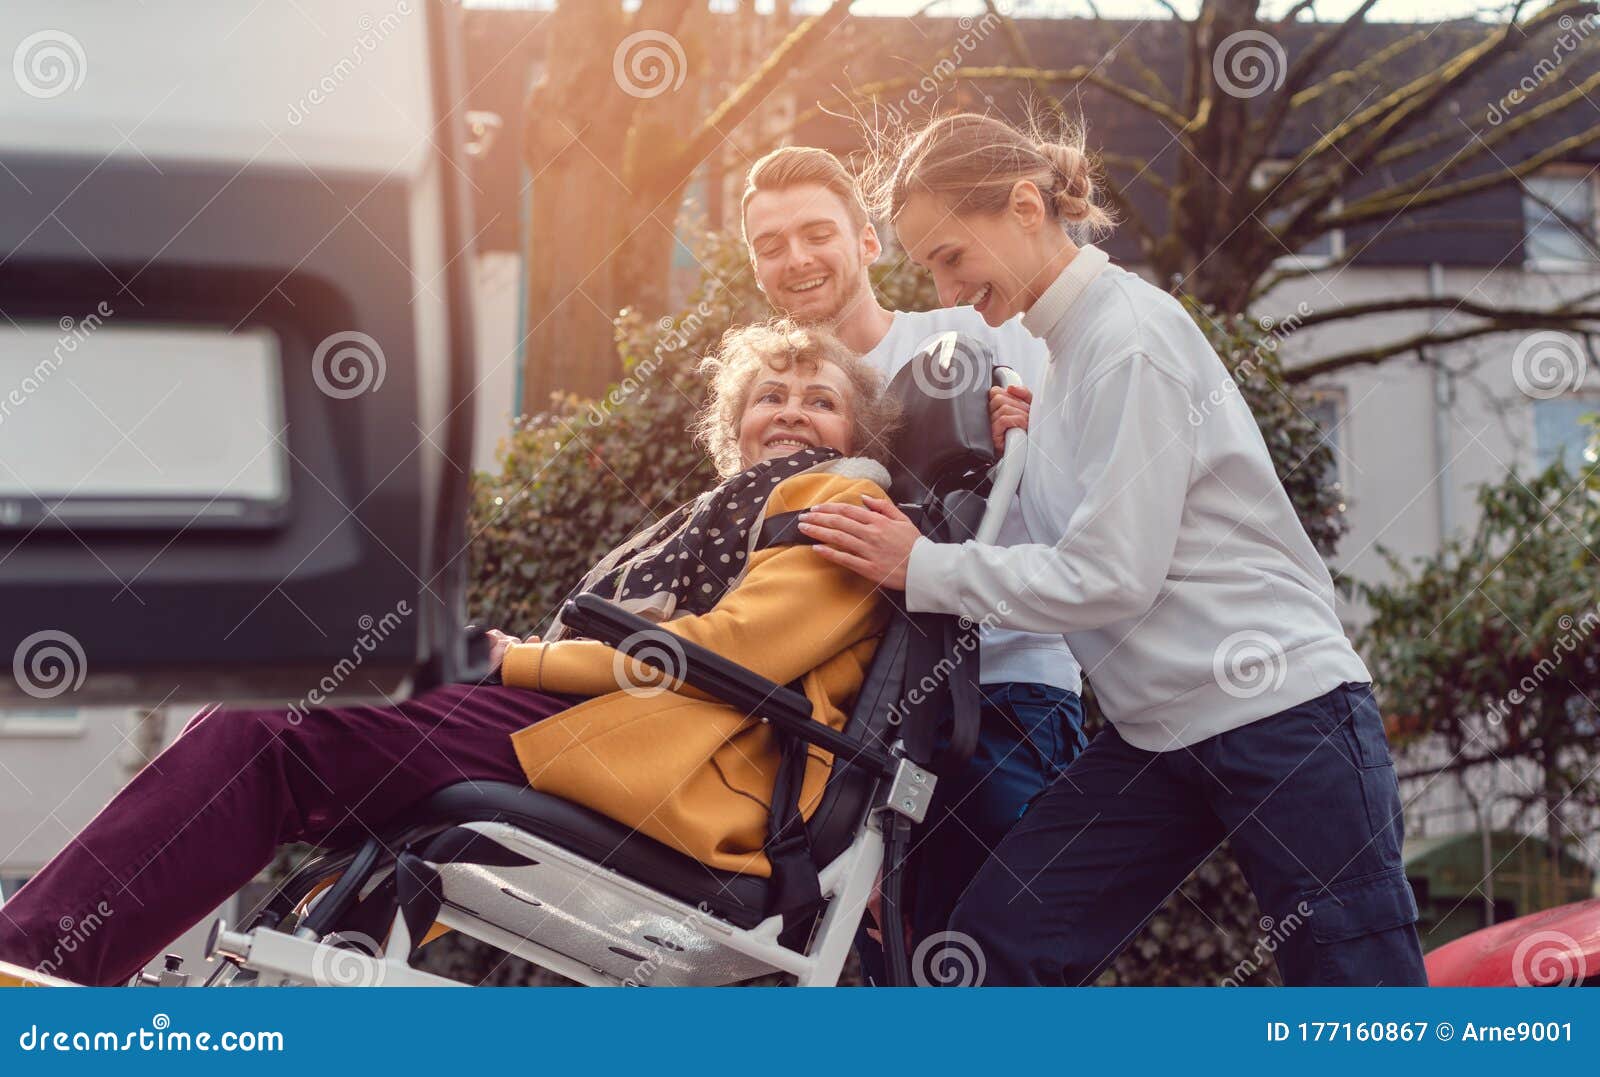 two helpers picking up disabled senior woman for transport